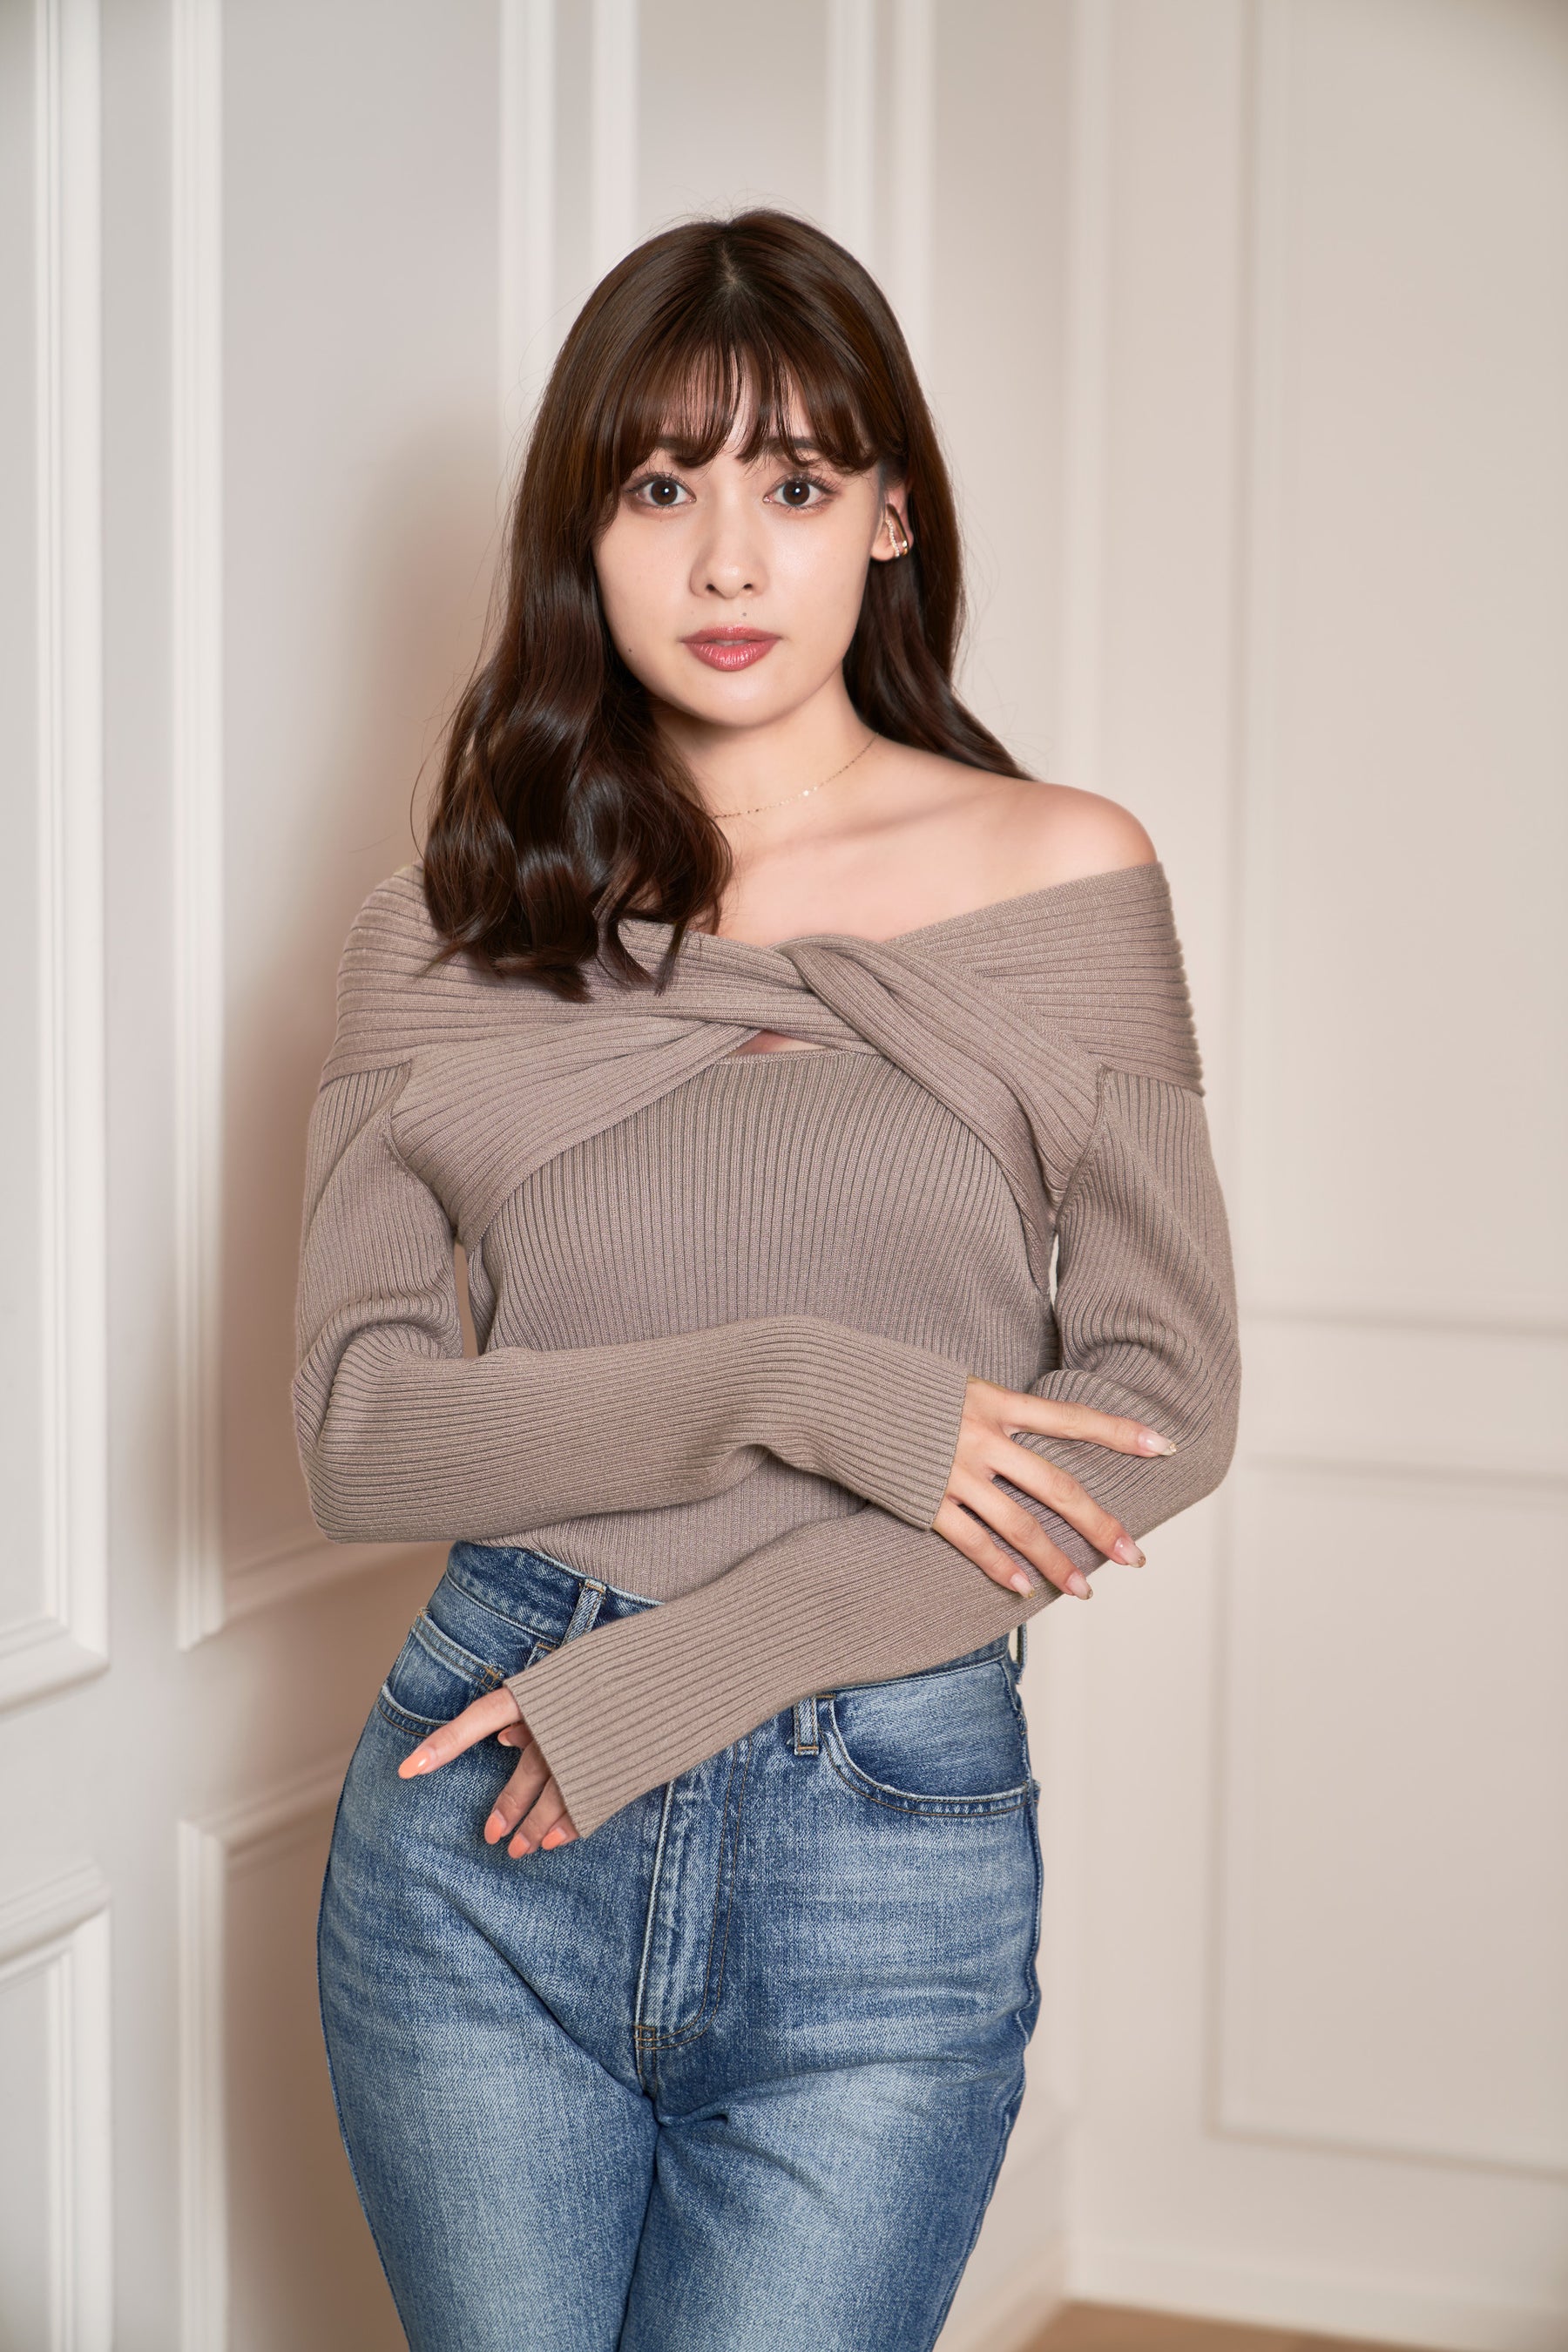 Her lip to Twist Cutout Knit Pullover 新品